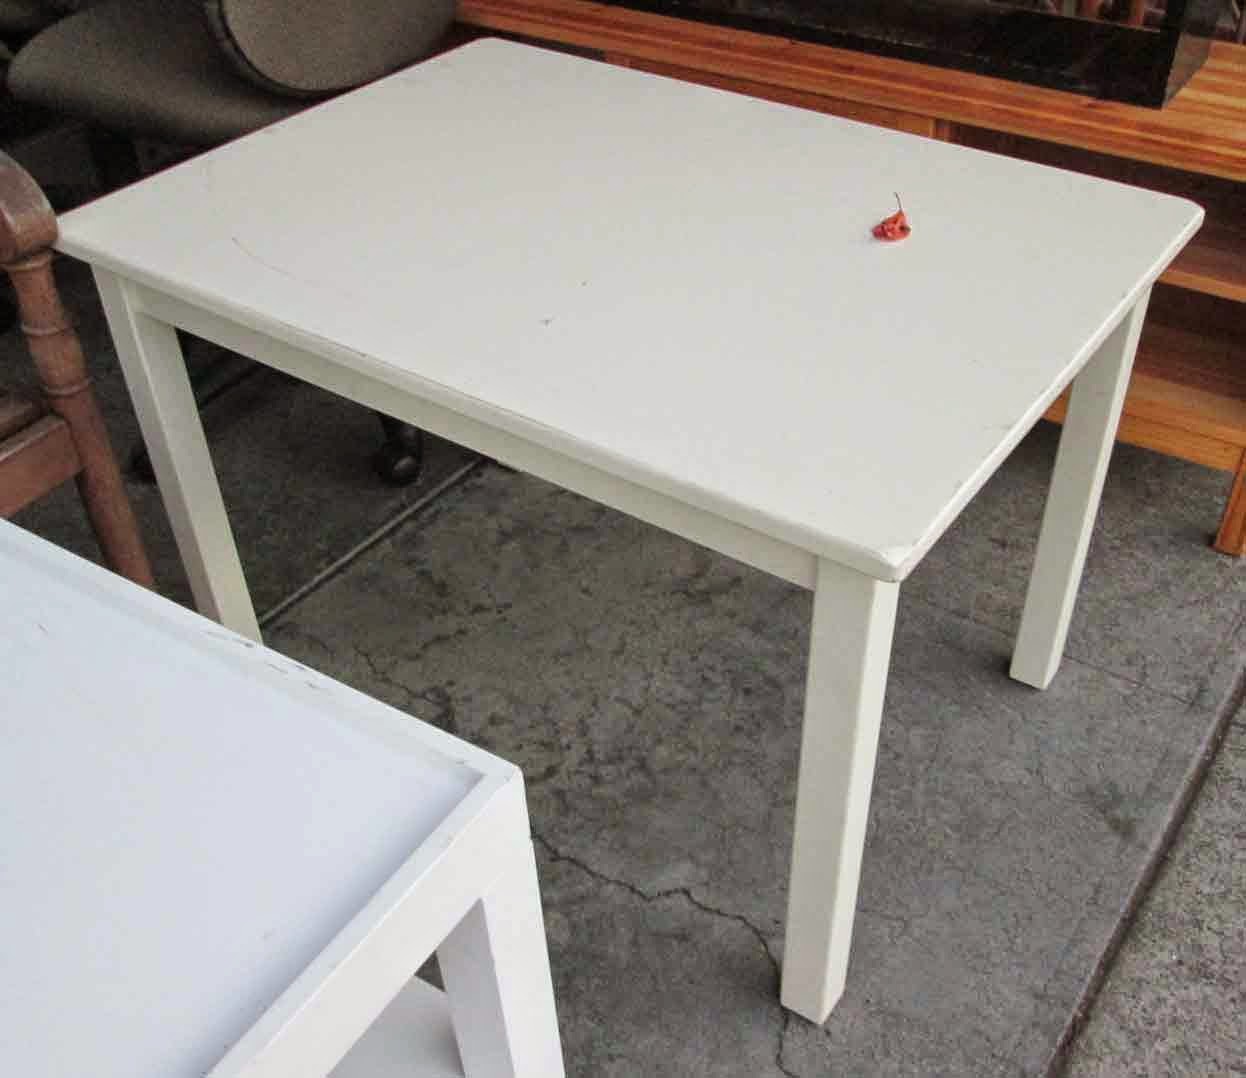 UHURU FURNITURE & COLLECTIBLES: SOLD White End Table - $20